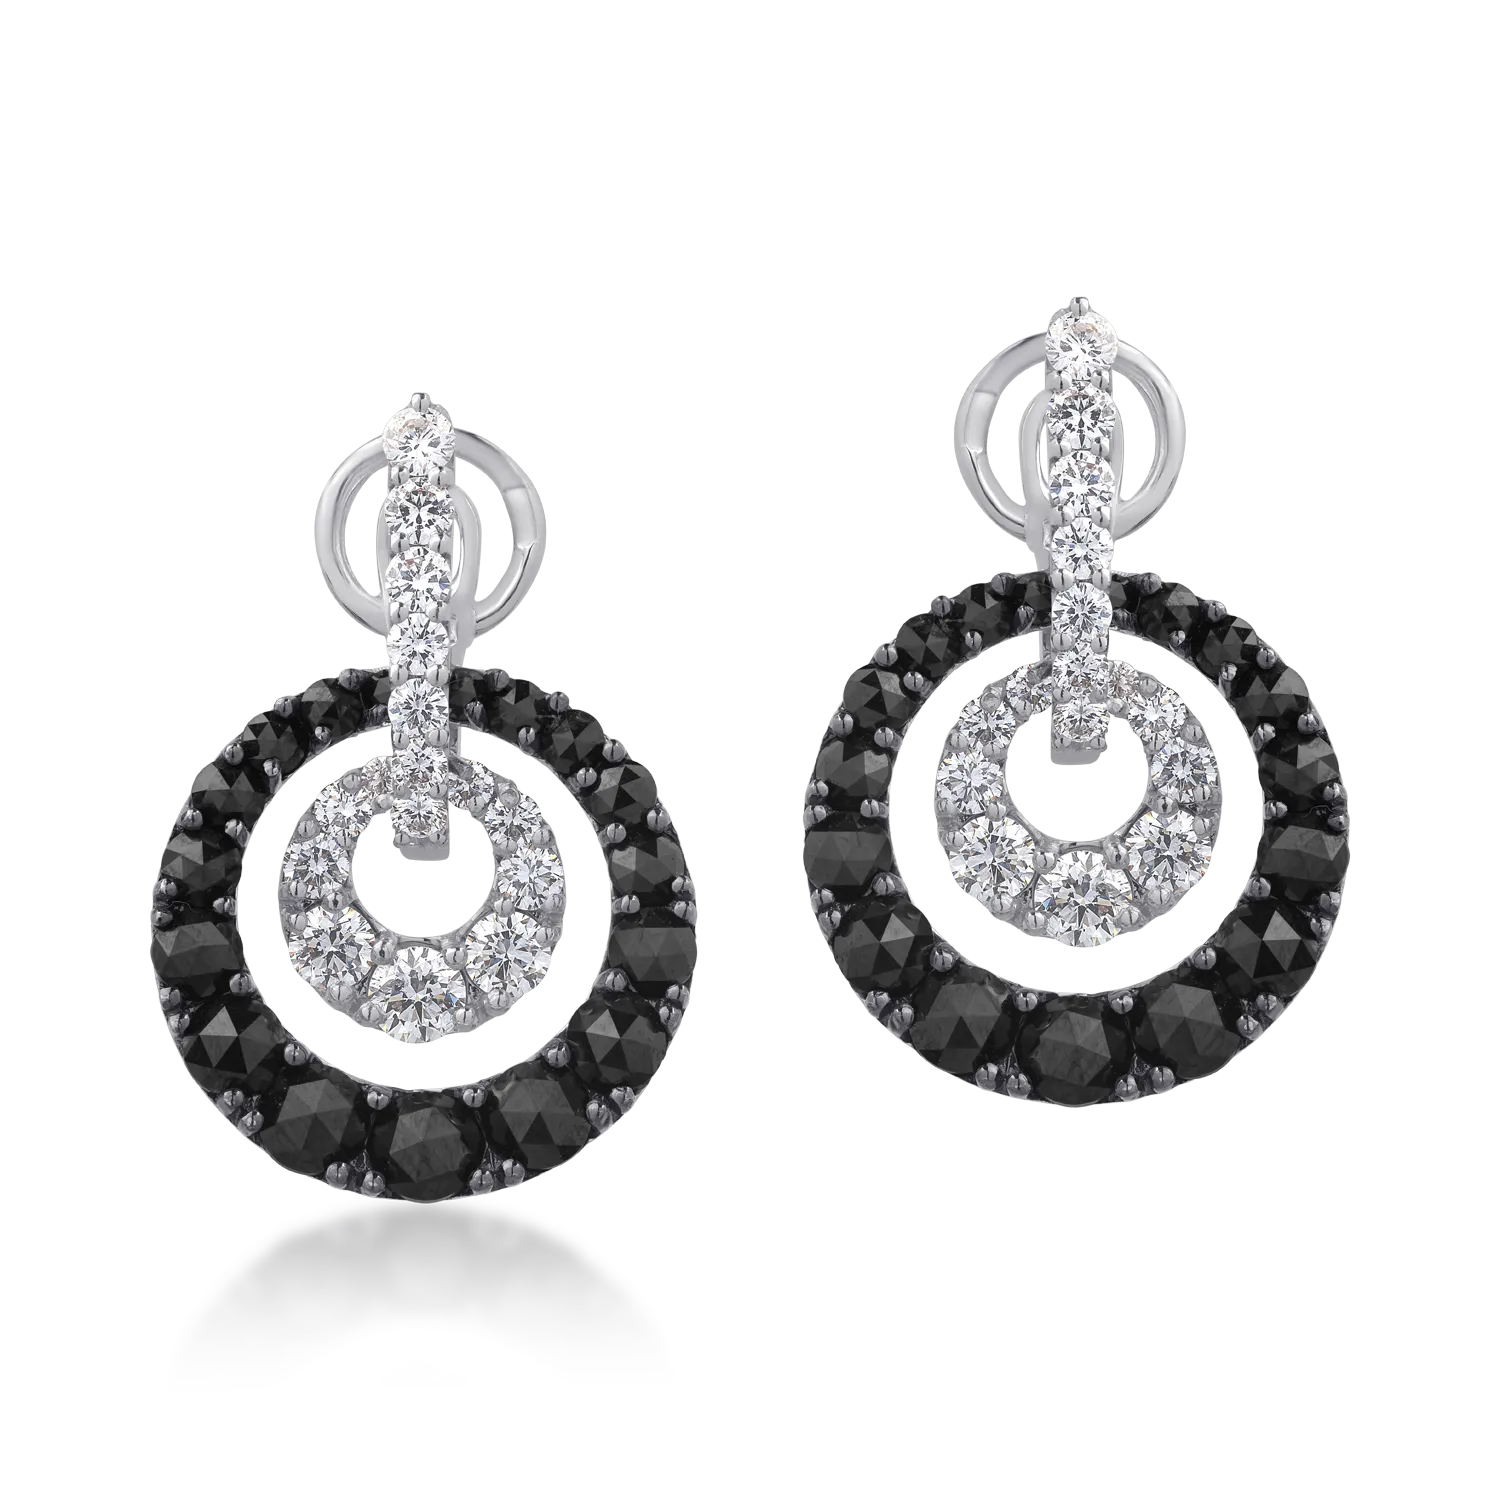 18K white gold earrings with 4.86ct black diamonds and 1.96ct clear diamonds